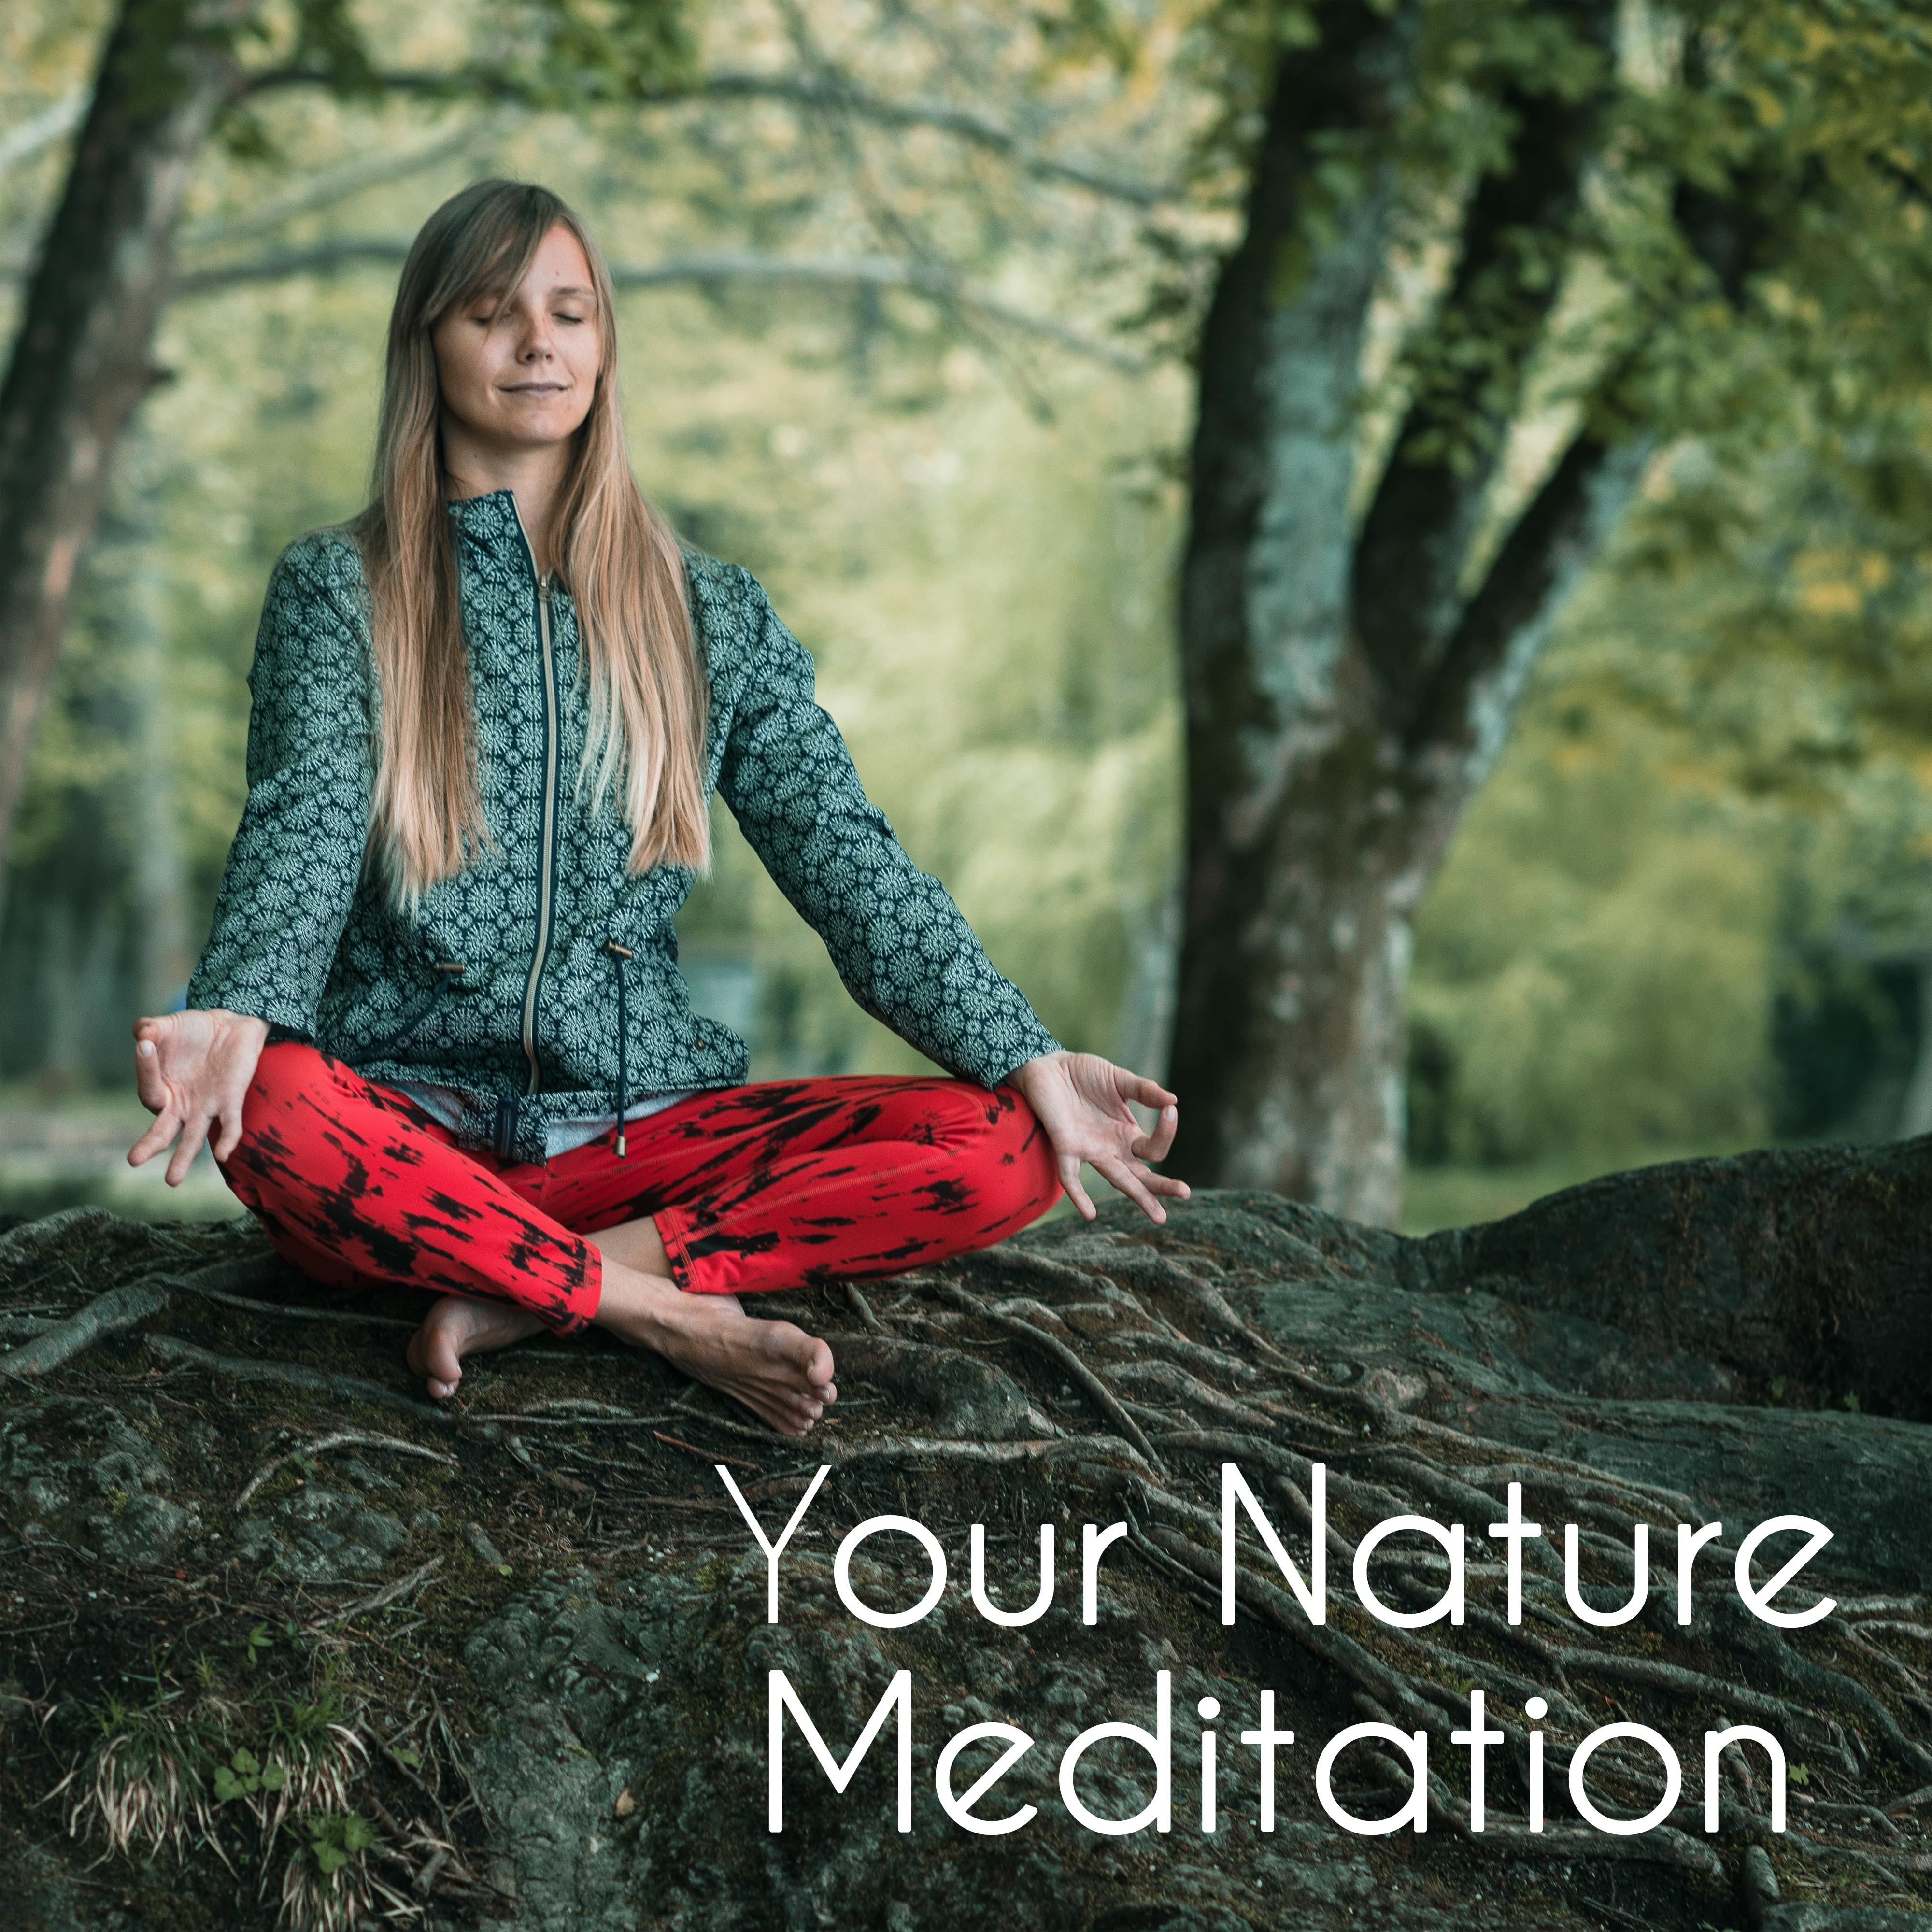 Your Nature Meditation  New Age Serenity Nature Sounds for Rest, Inner Harmony, Relax  Focus